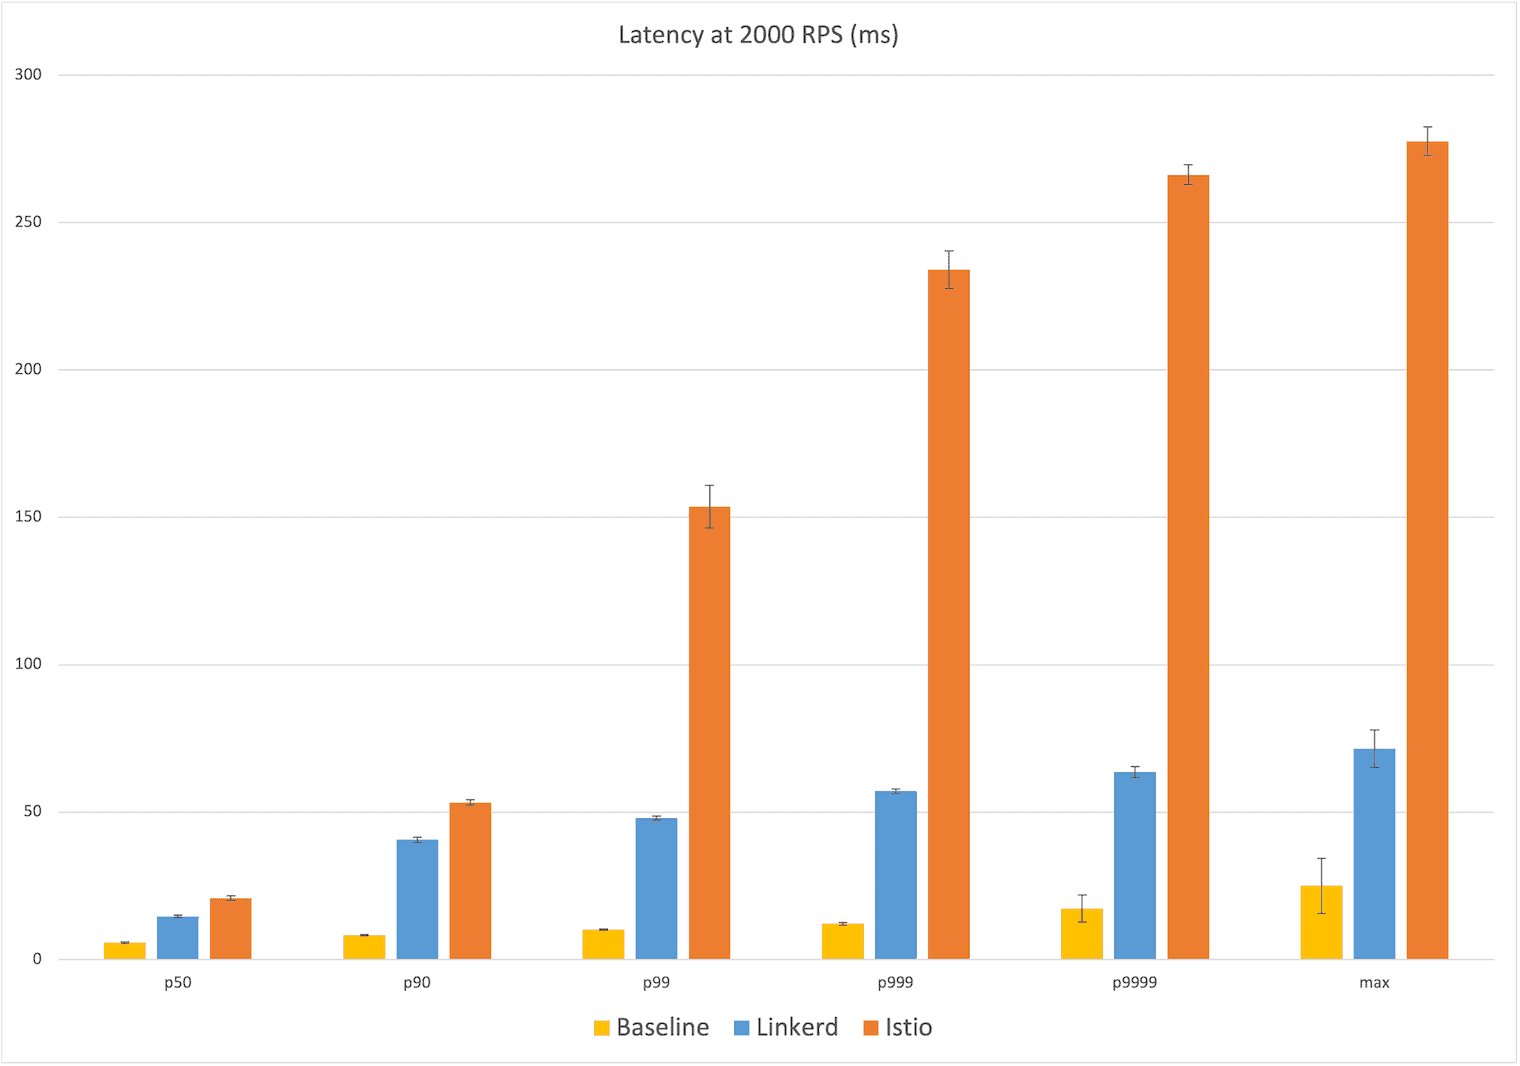 Bar chart showing comparison between baseline, Linkerd and Istio with latency at 2000 RPS (ms) where Istio shows the highest number among all